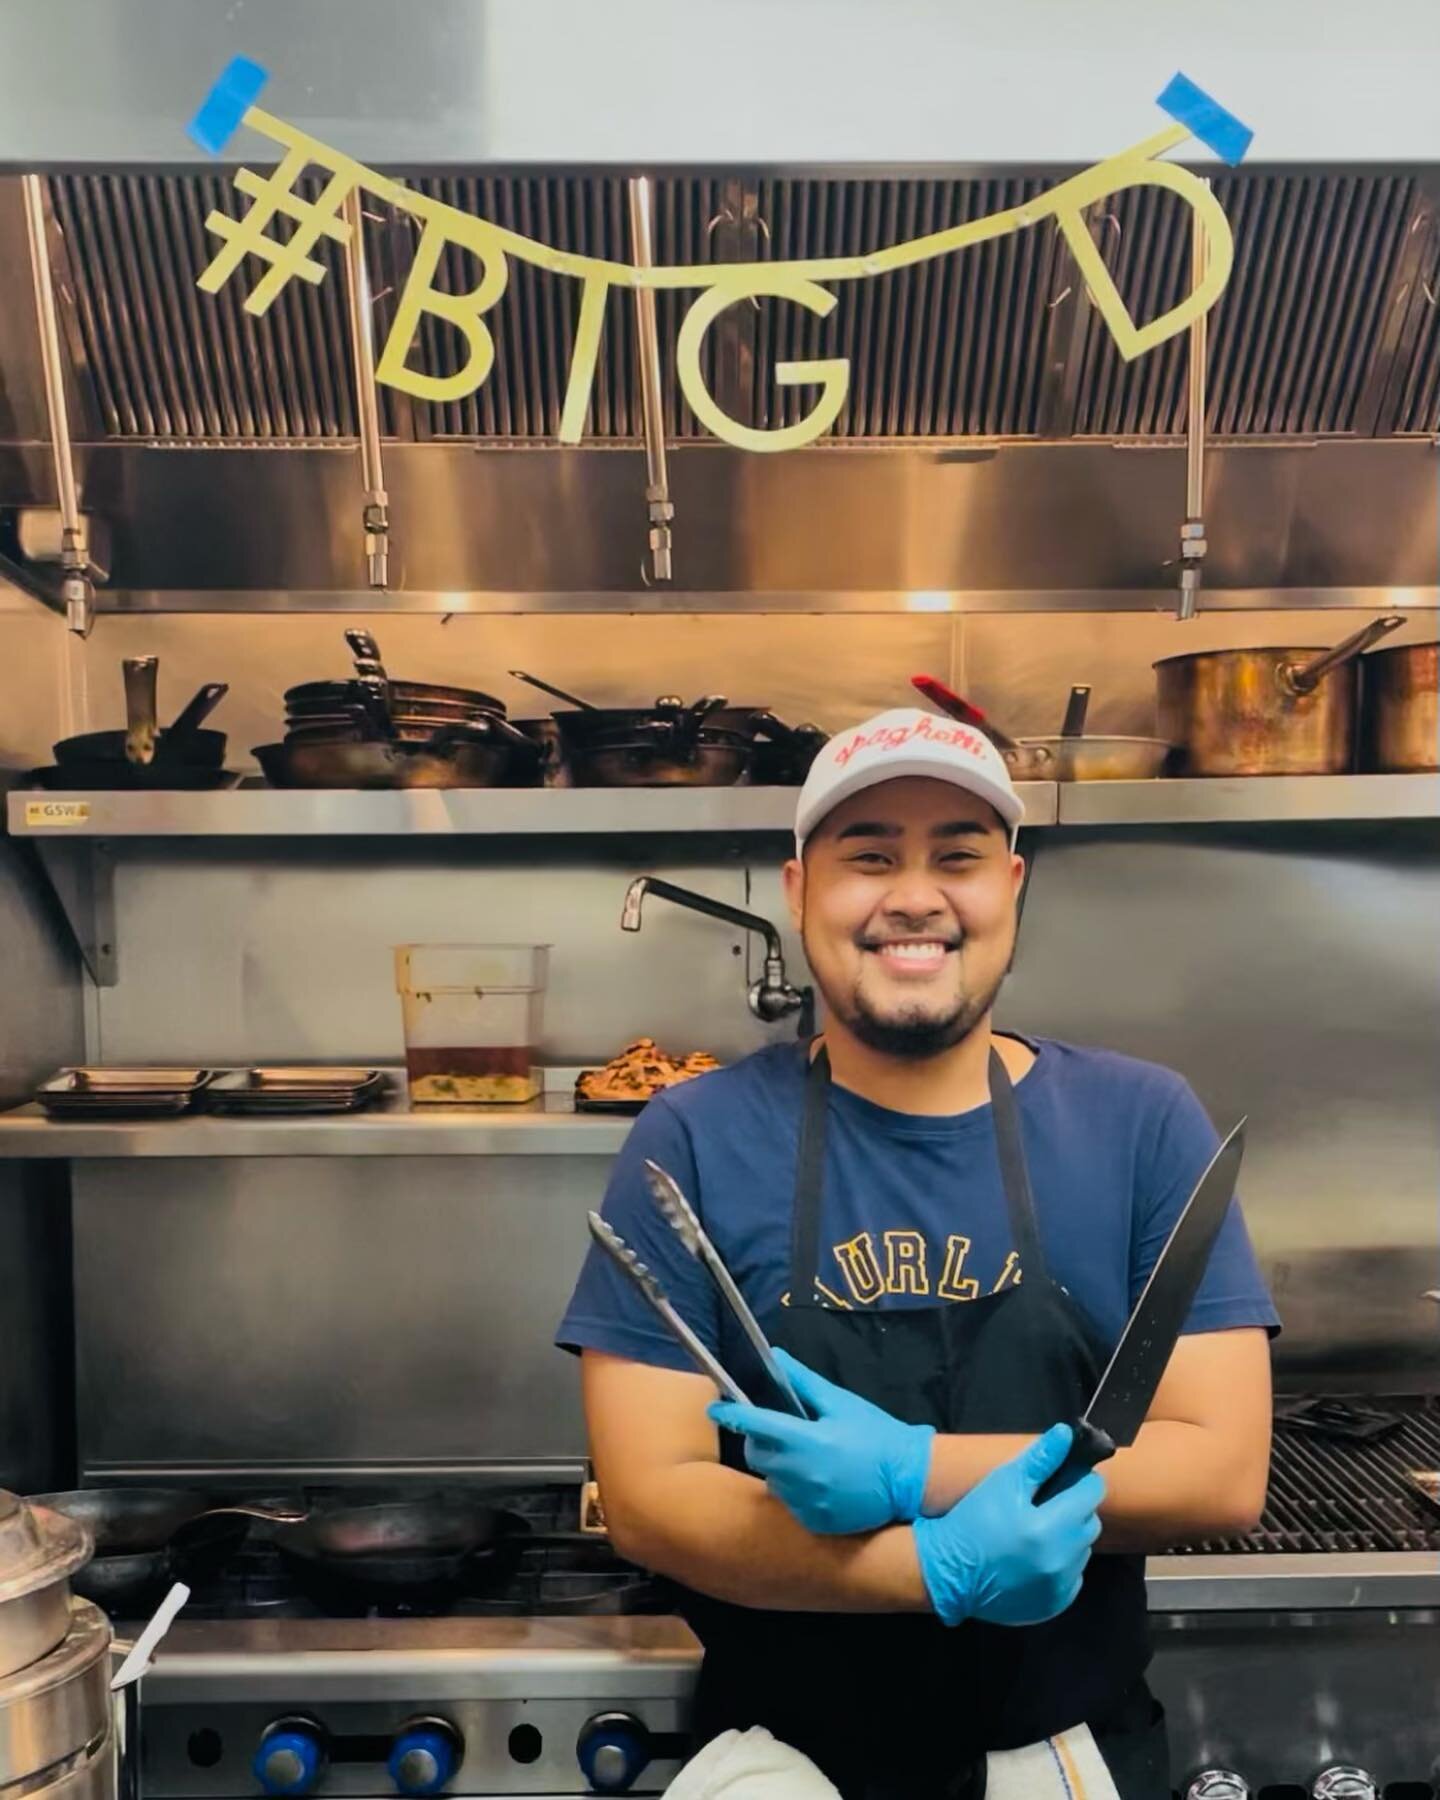 Happy birthday Daryl!!!

Daryl has been one of our day ones and he&rsquo;s simply the best! 

He started off in the front of house in our 1.0 days, and is now our assistant kitchen manager who basically knows every role in the kitchen. 

Fun facts: 
